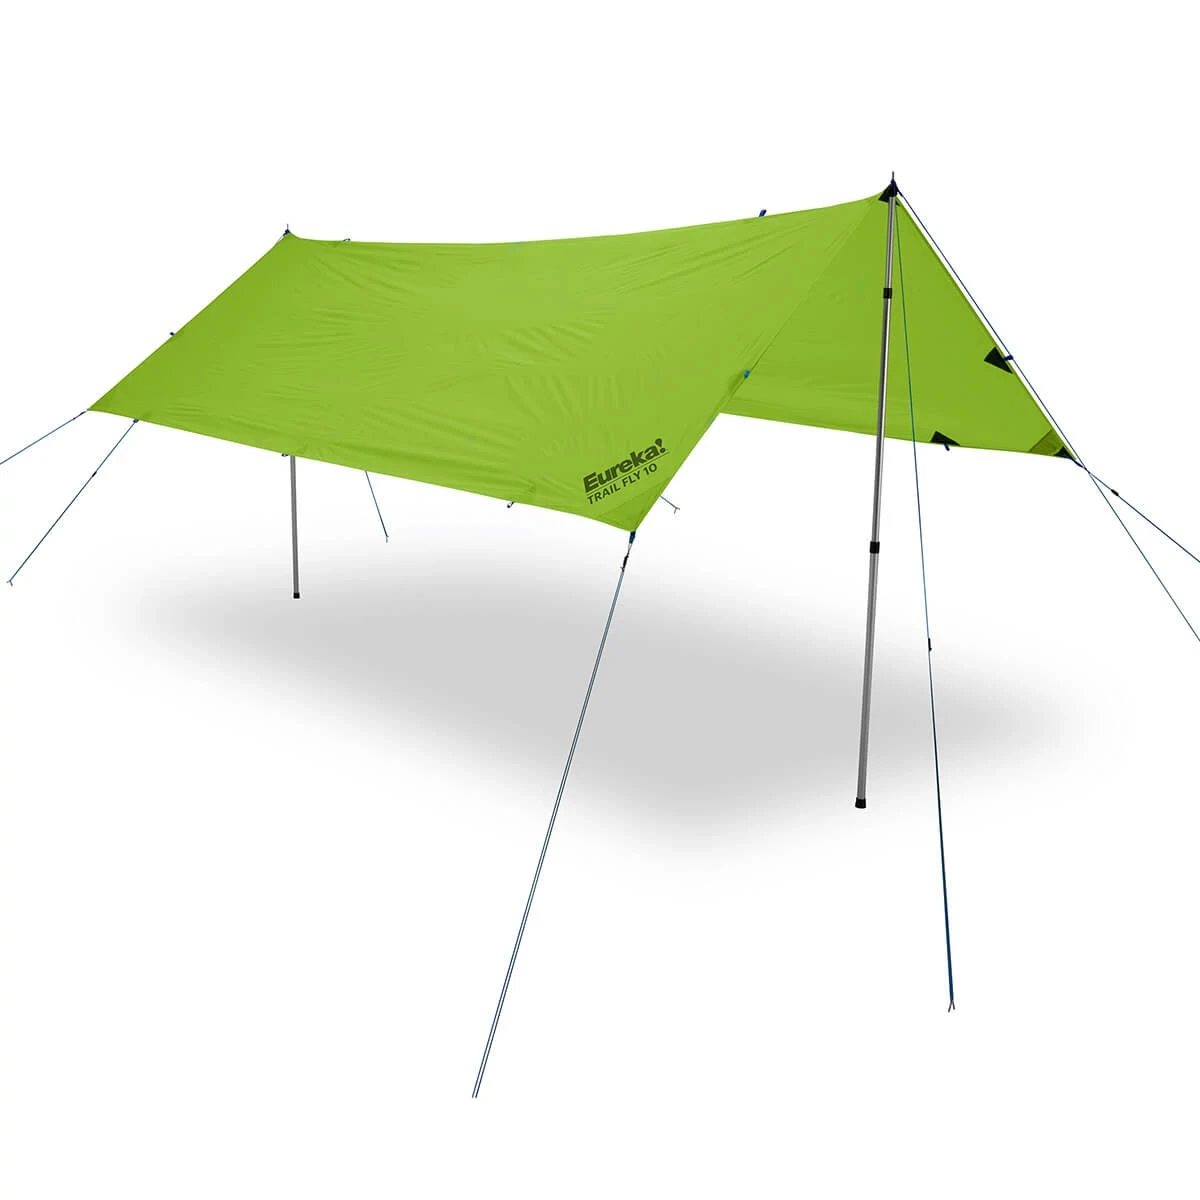 Trail Fly 10 pitch configuration option for shade. Poles sold separately.